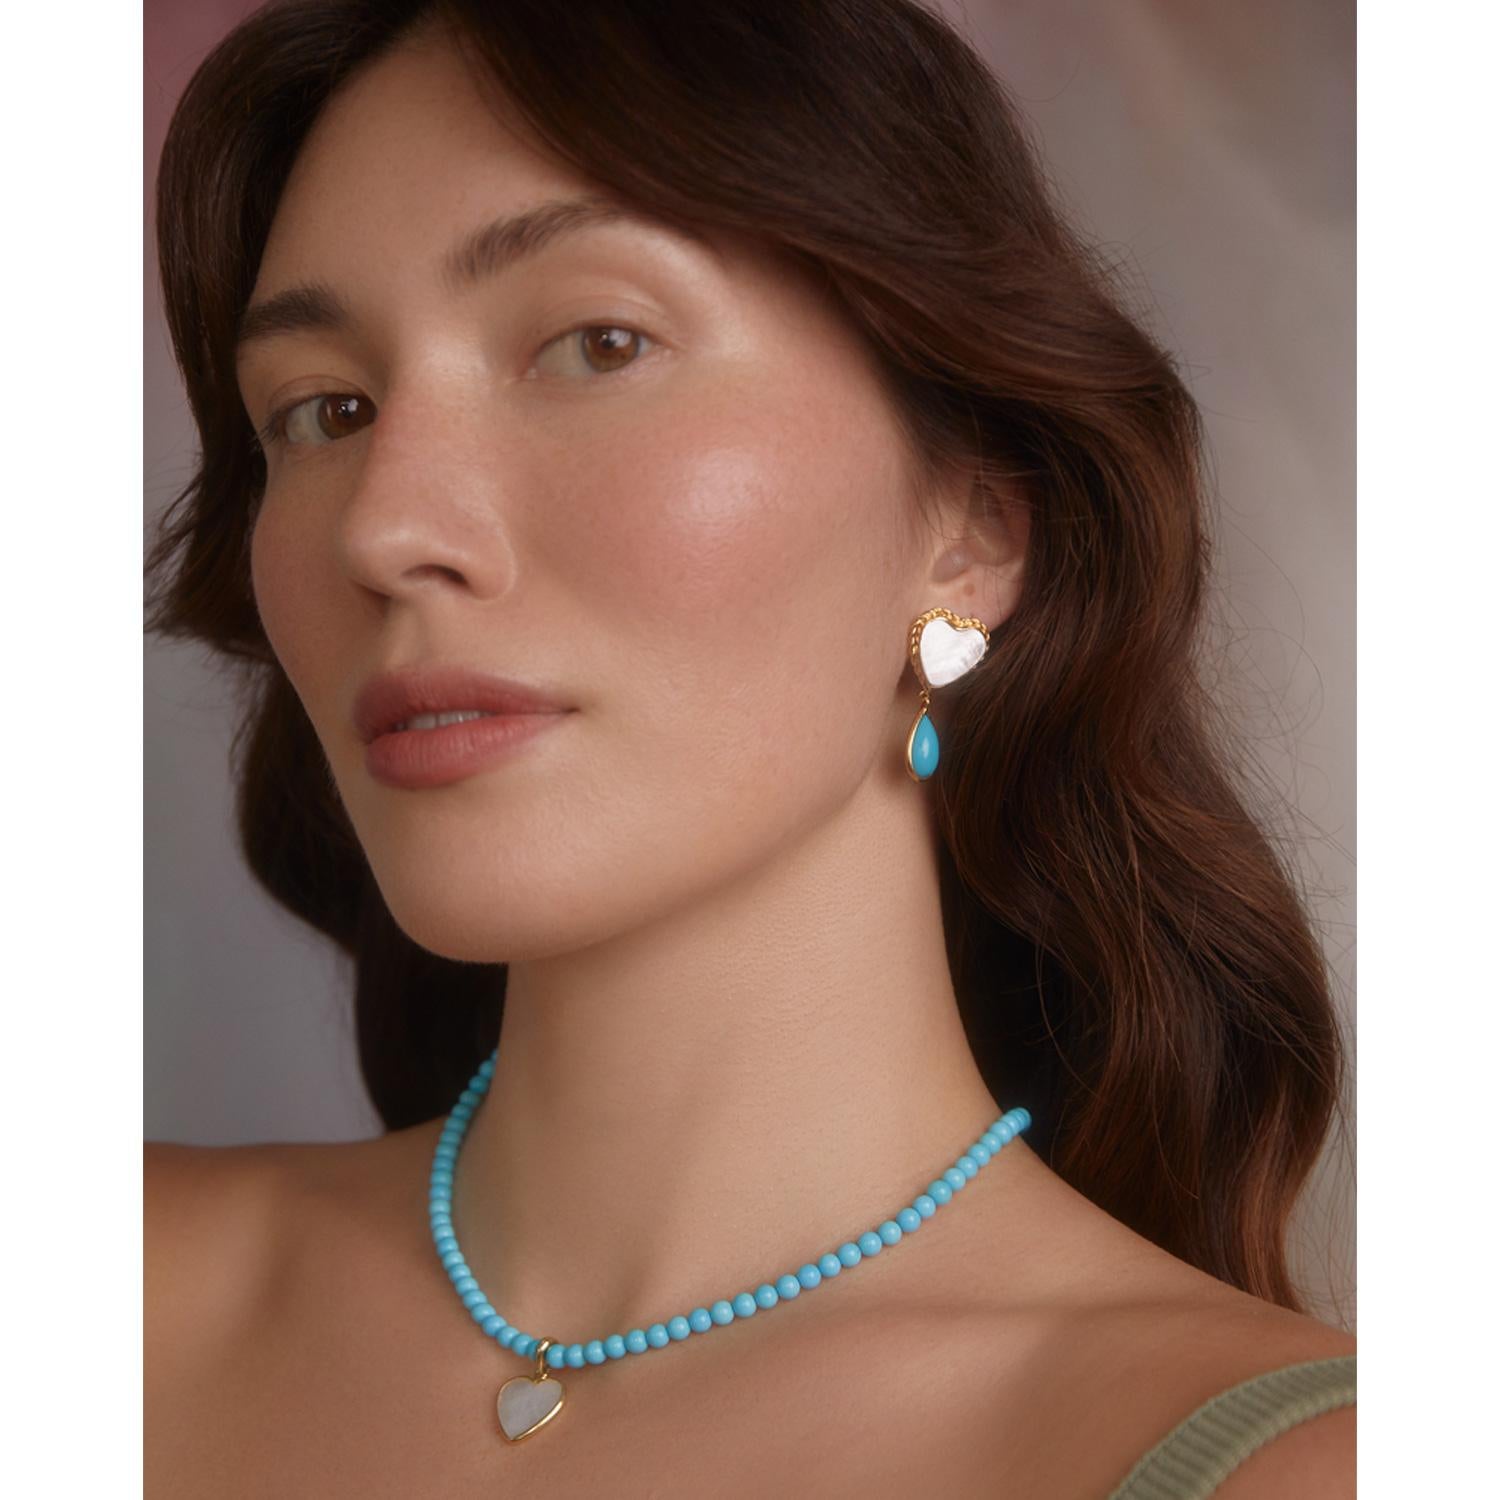 The Happy Heart necklace by Vintouch Jewels is centered with an iridescent mother of pearl heart-shaped pendant that sparkles like fresh morning dew. It is handmade in Italy from 24-karat gold vermeil and strung with natural turquoise beads in